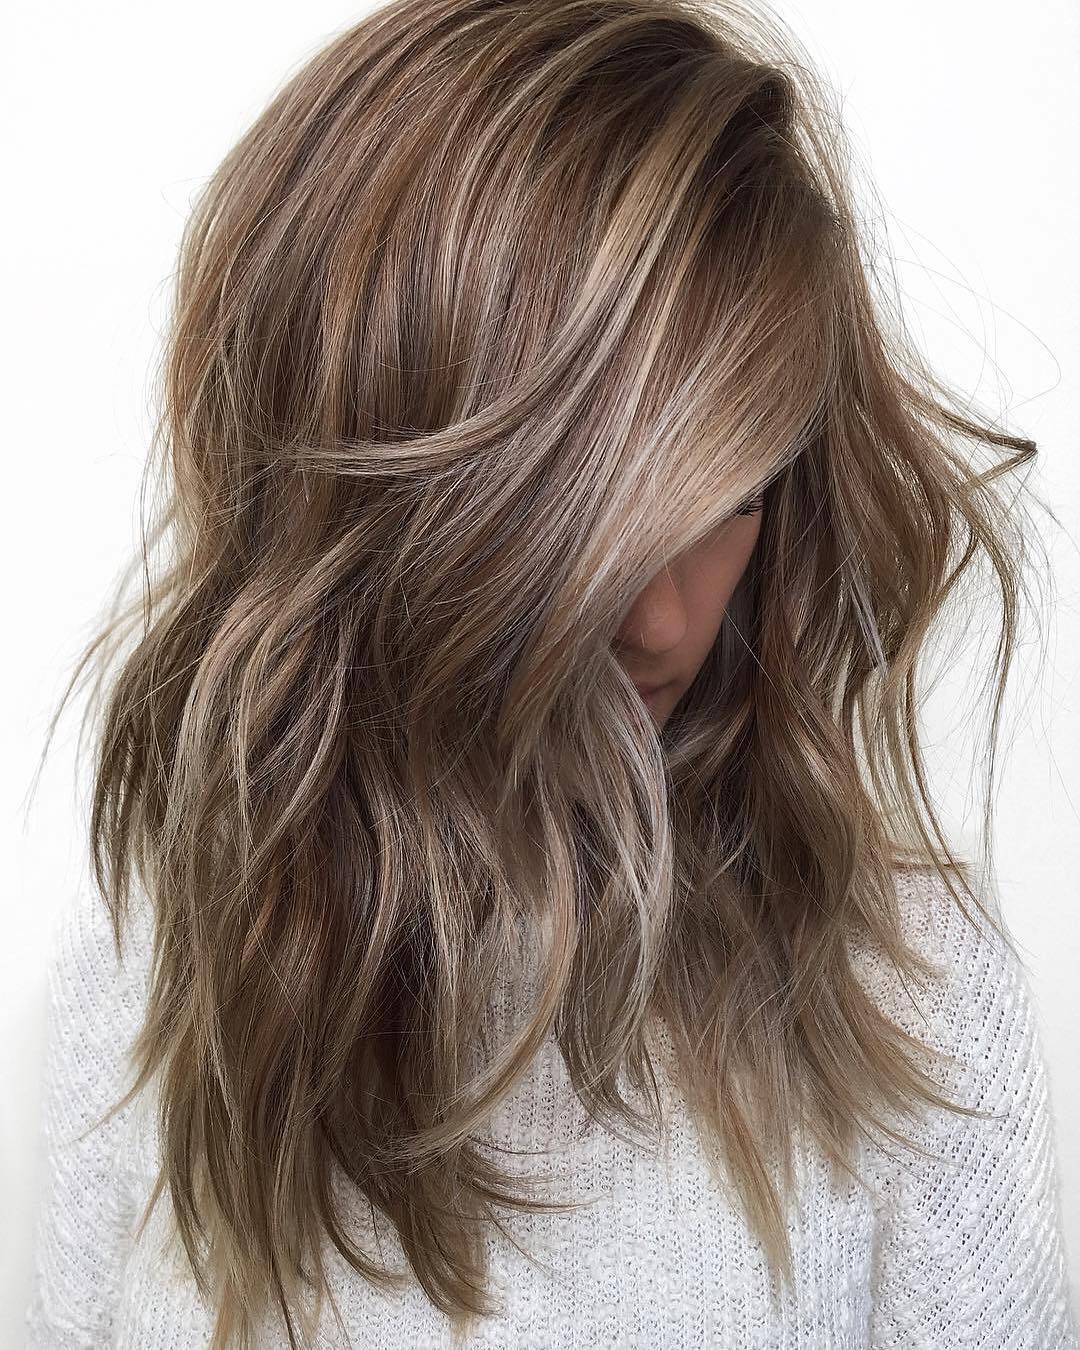 Attractive ‘bed-head’ balayage ombré hairstyles for shoulder length hair